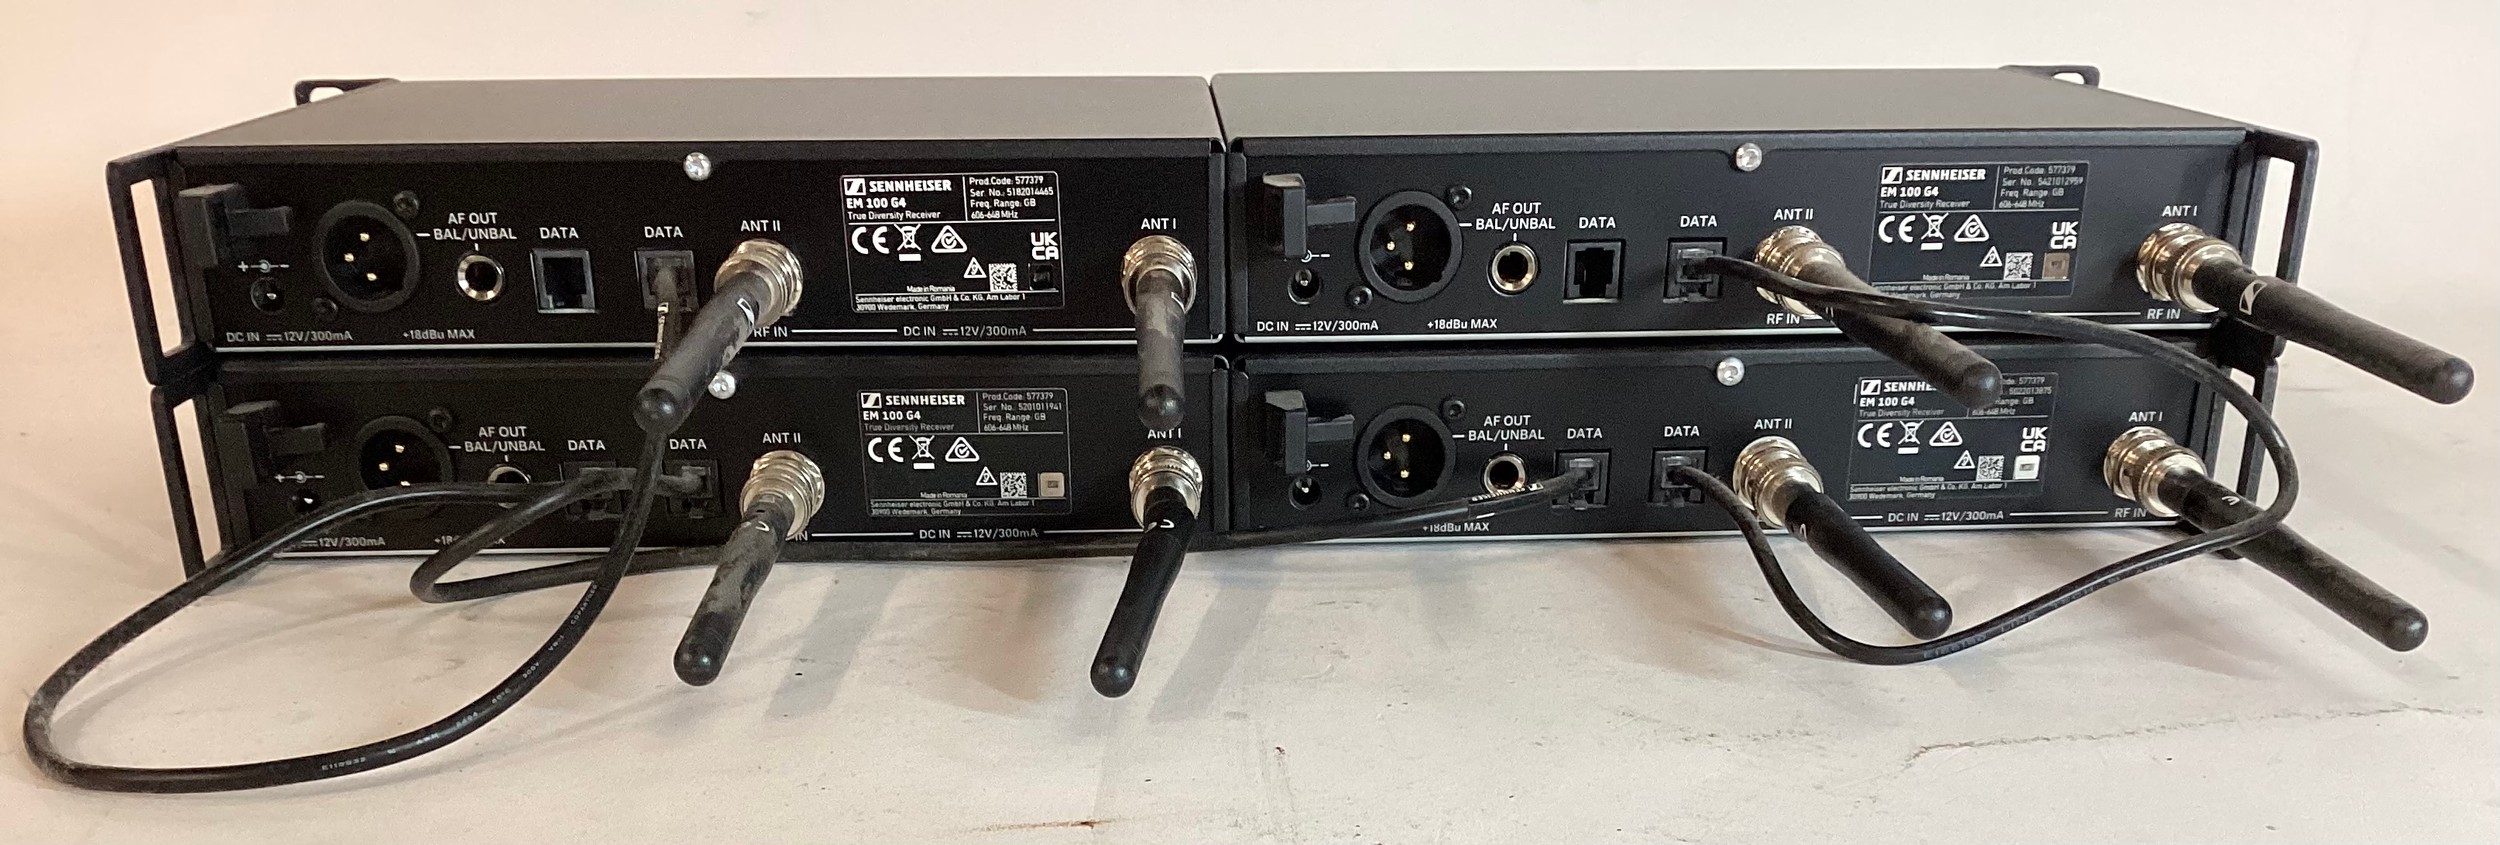 SENNHEISER WIRELESS MICROPHONE RECEIVERS. These are model No. EW100 G4-GB and come untested as no - Bild 2 aus 2